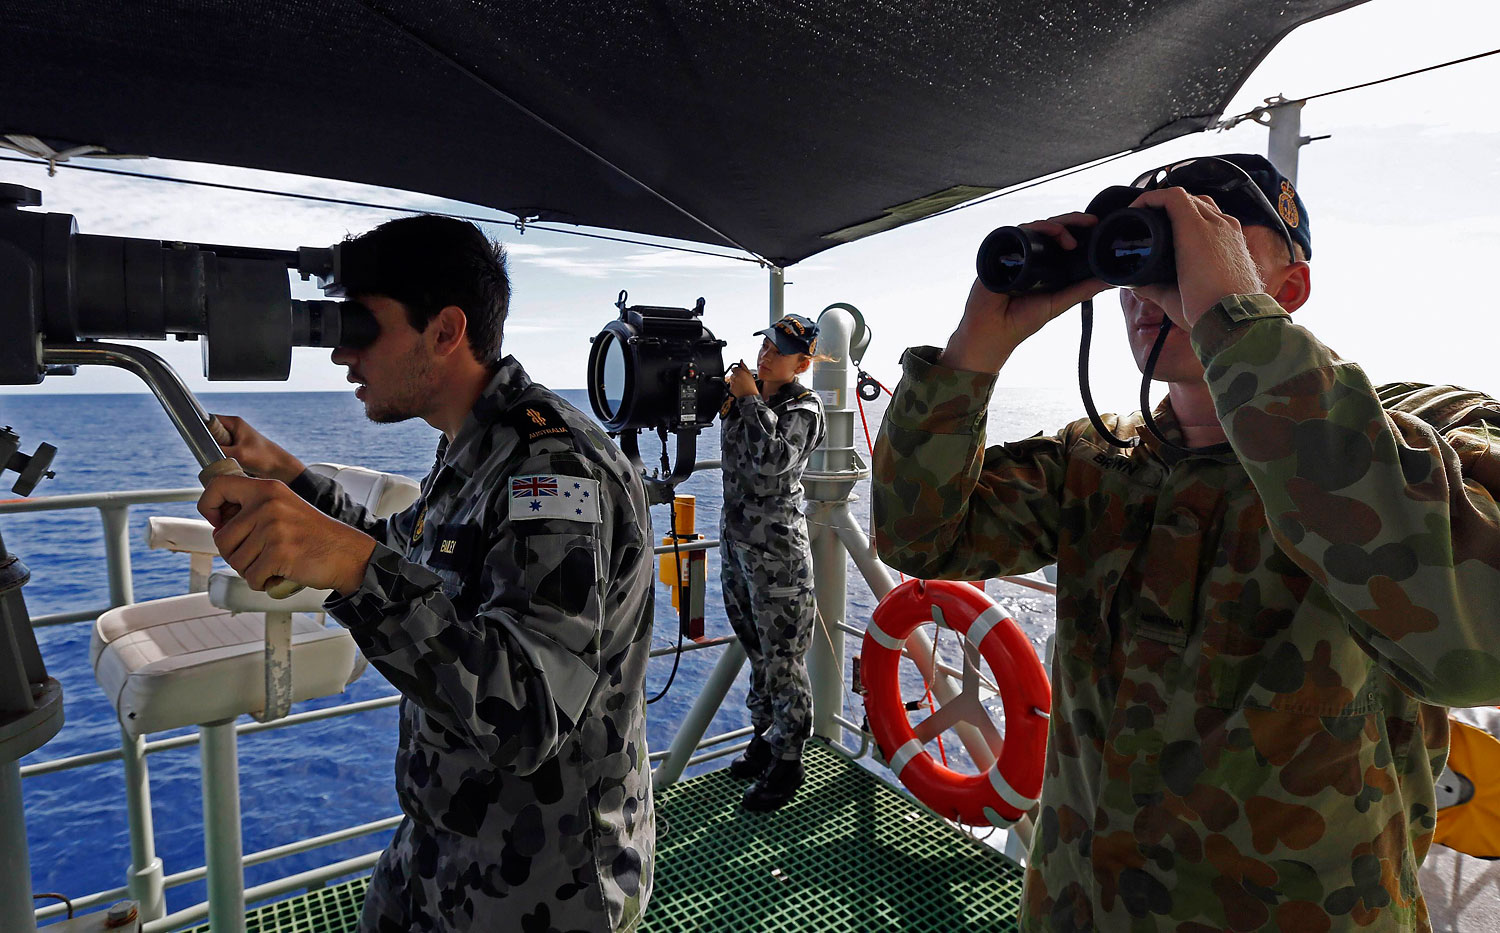 Crewmen aboard the Australian Navy ship HMAS Perth look towards the HMAS Success during manoeuvres as they continue to search for missing Malaysian Airlines flight MH370